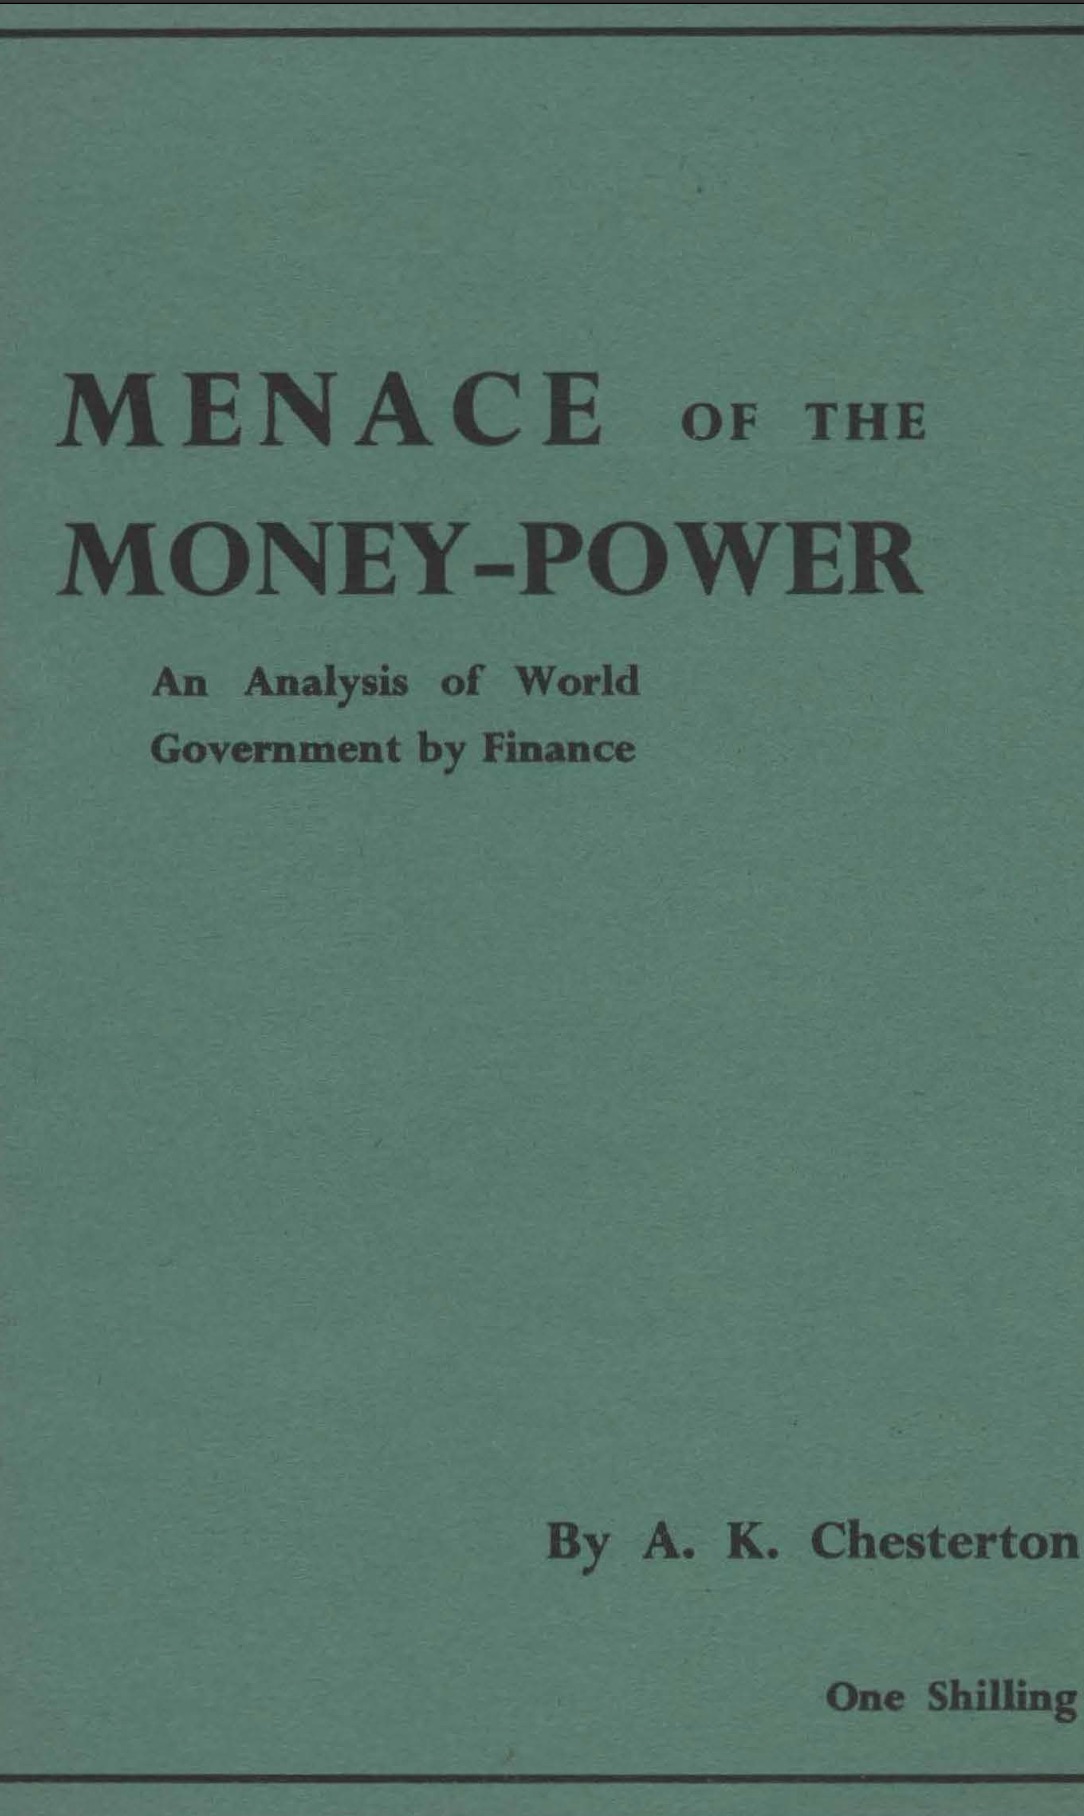 The Menace of the Money Power (1946) by A K Chesterton